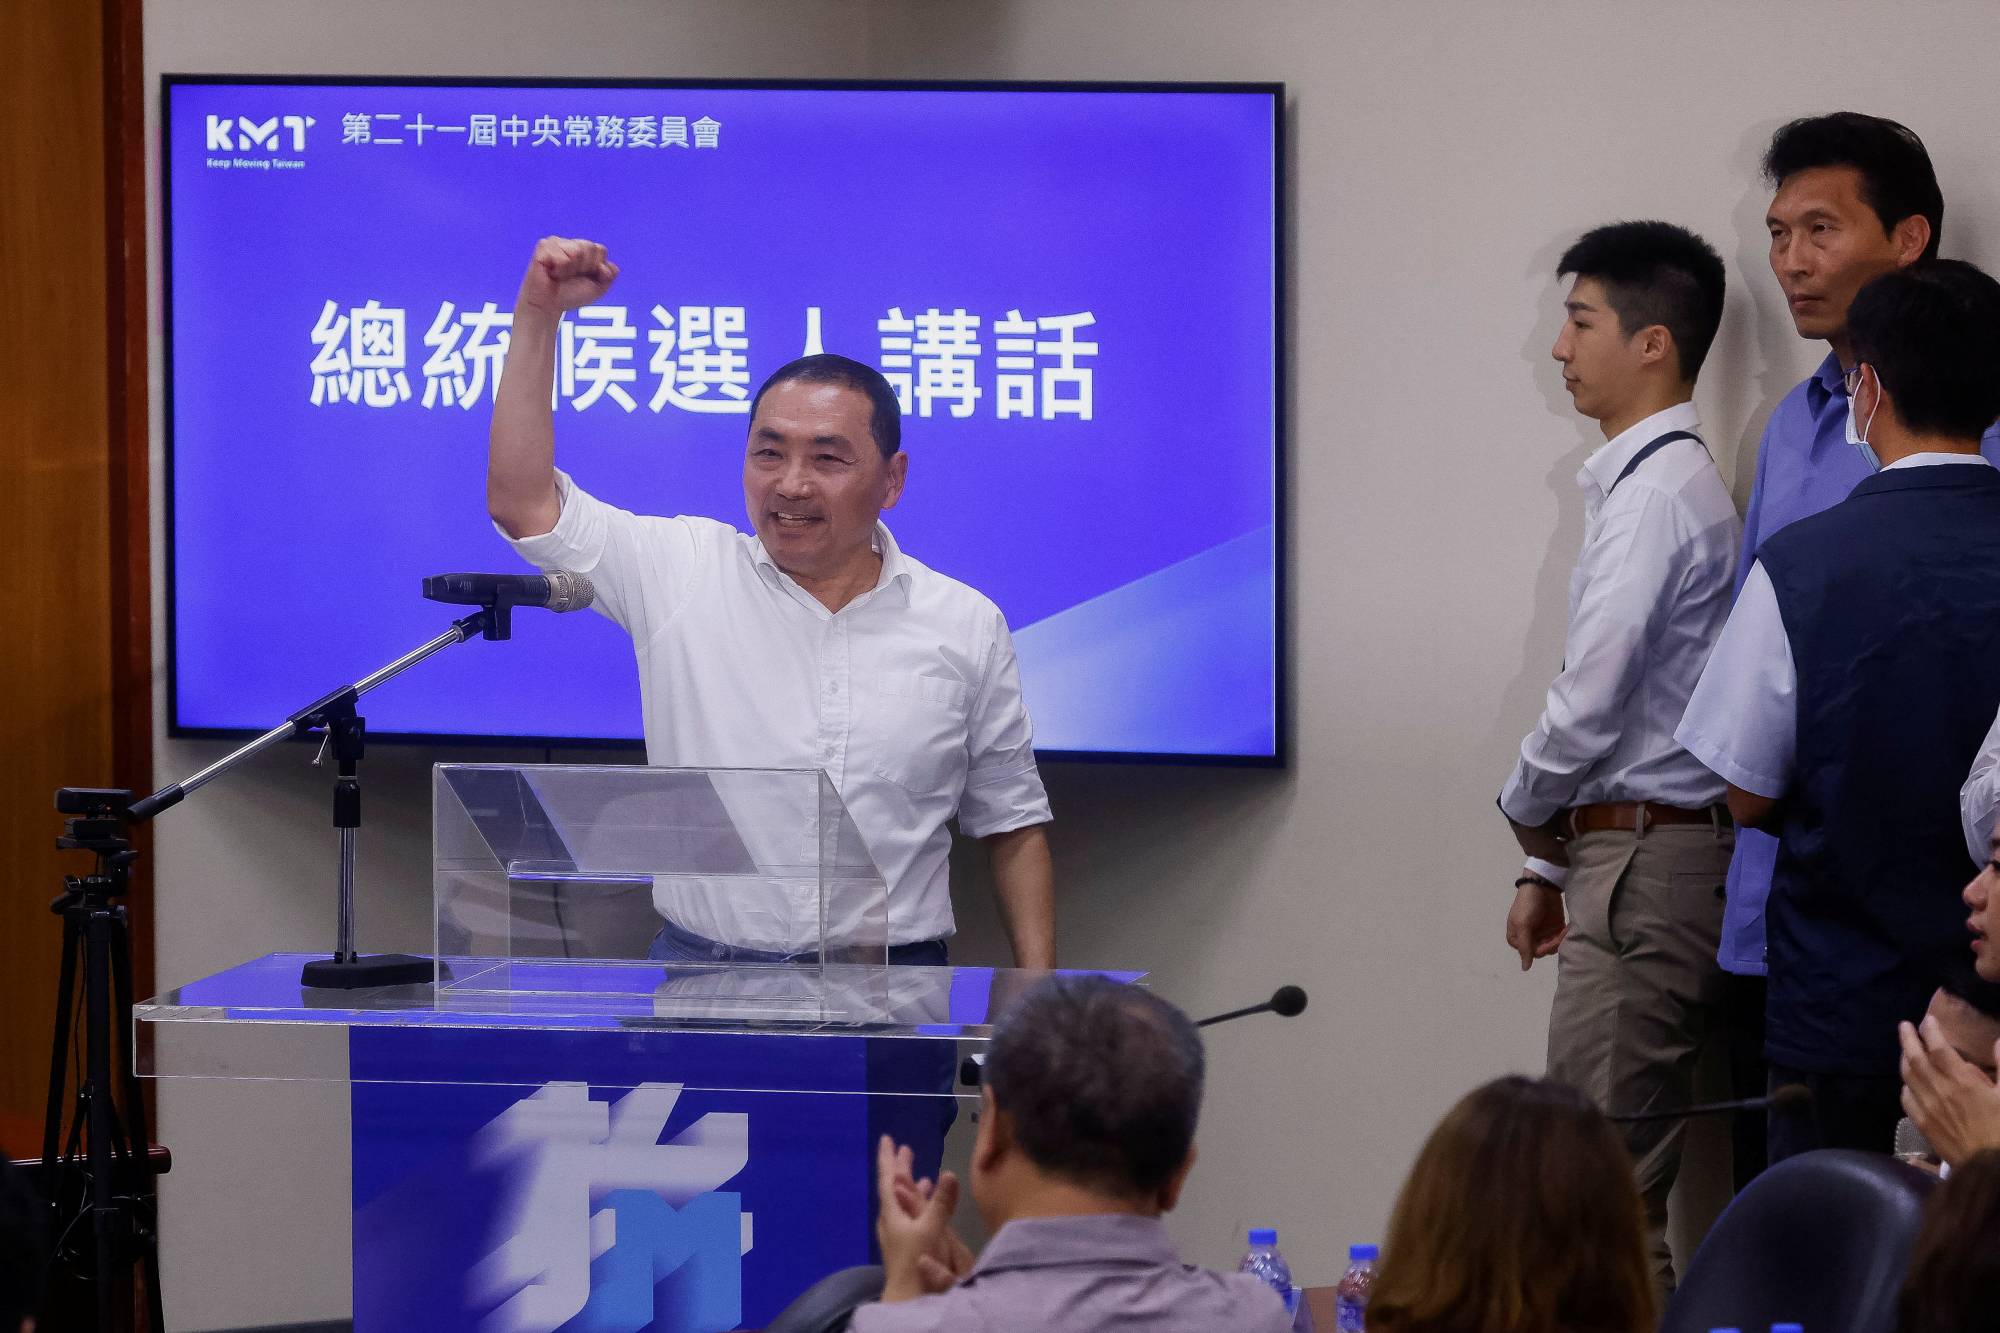 New Taipei City Mayor Hou Yu-ih raises his fist during a speech following his confirmation as the presidential candidate for Taiwan's main opposition Kuomintang, at their headquarters in Taipei on Wednesday.  | REUTERS